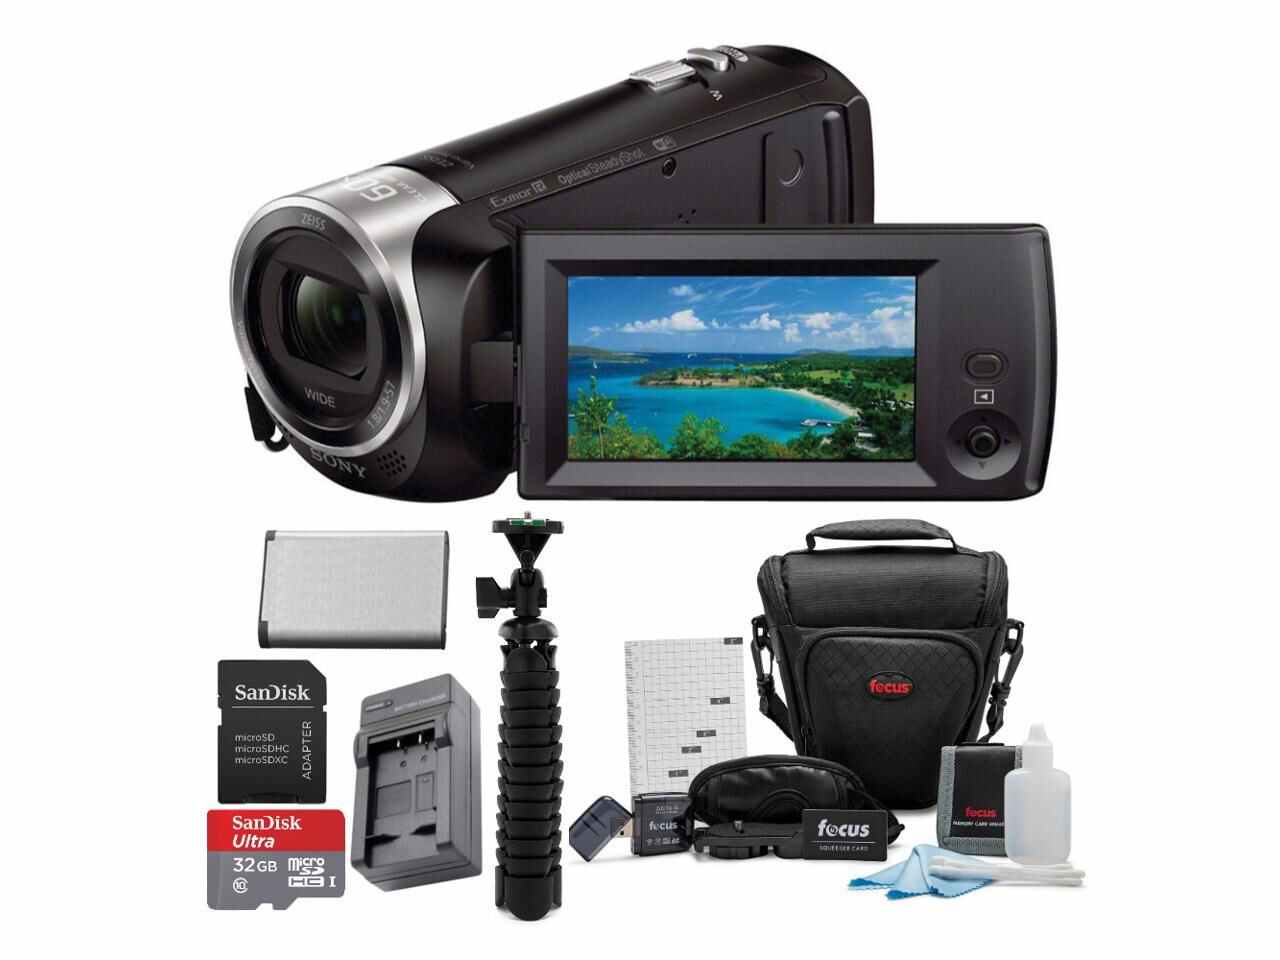 Sony HDR-CX440 Handycam Camcorder with 32GB Memory Card and Accessory Bundle